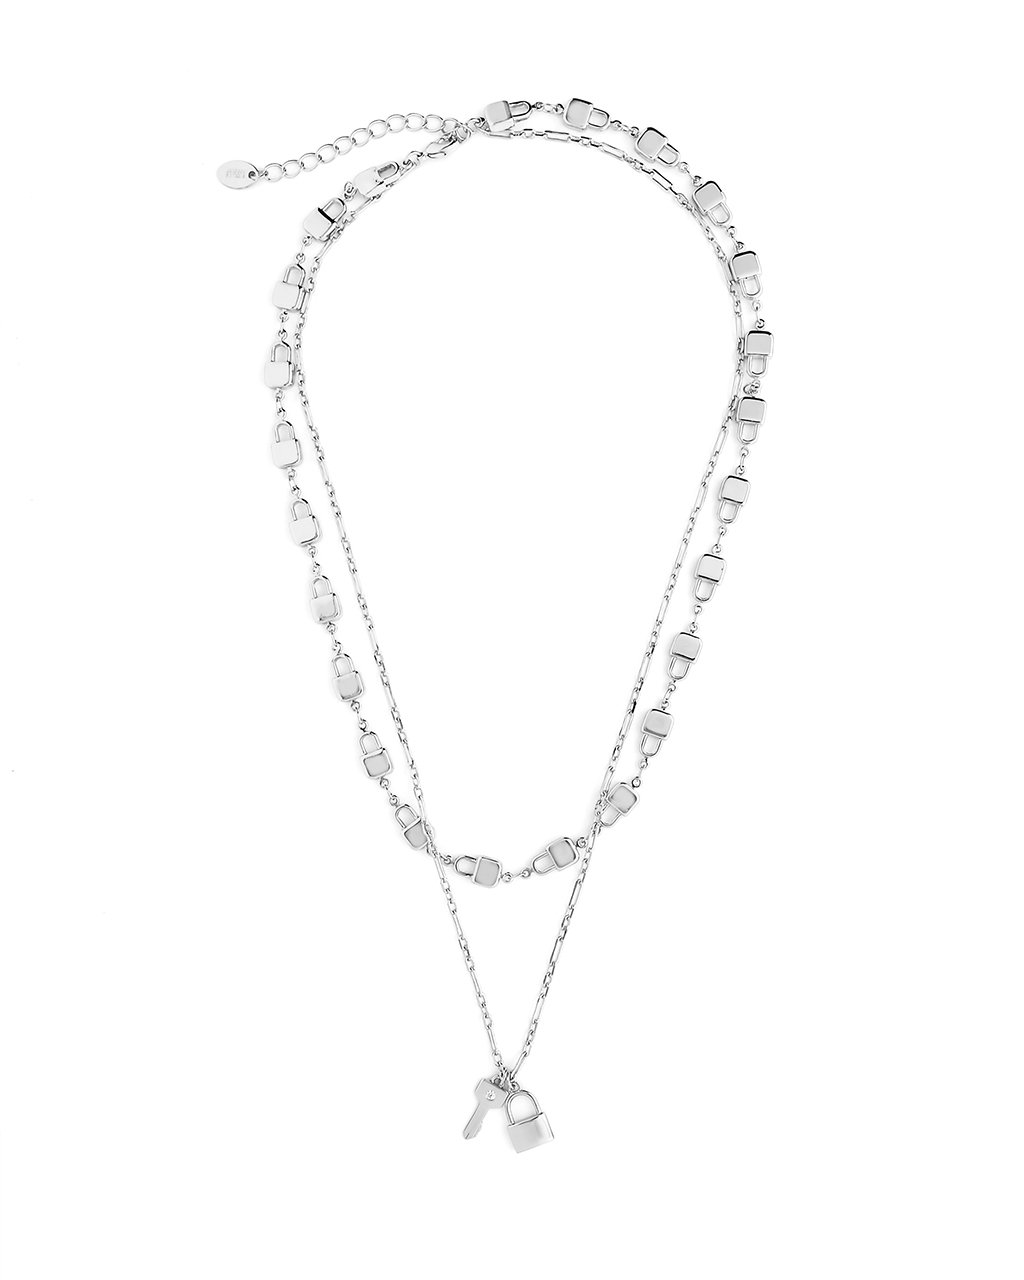 Lock & Key Layered Necklace Necklace Sterling Forever